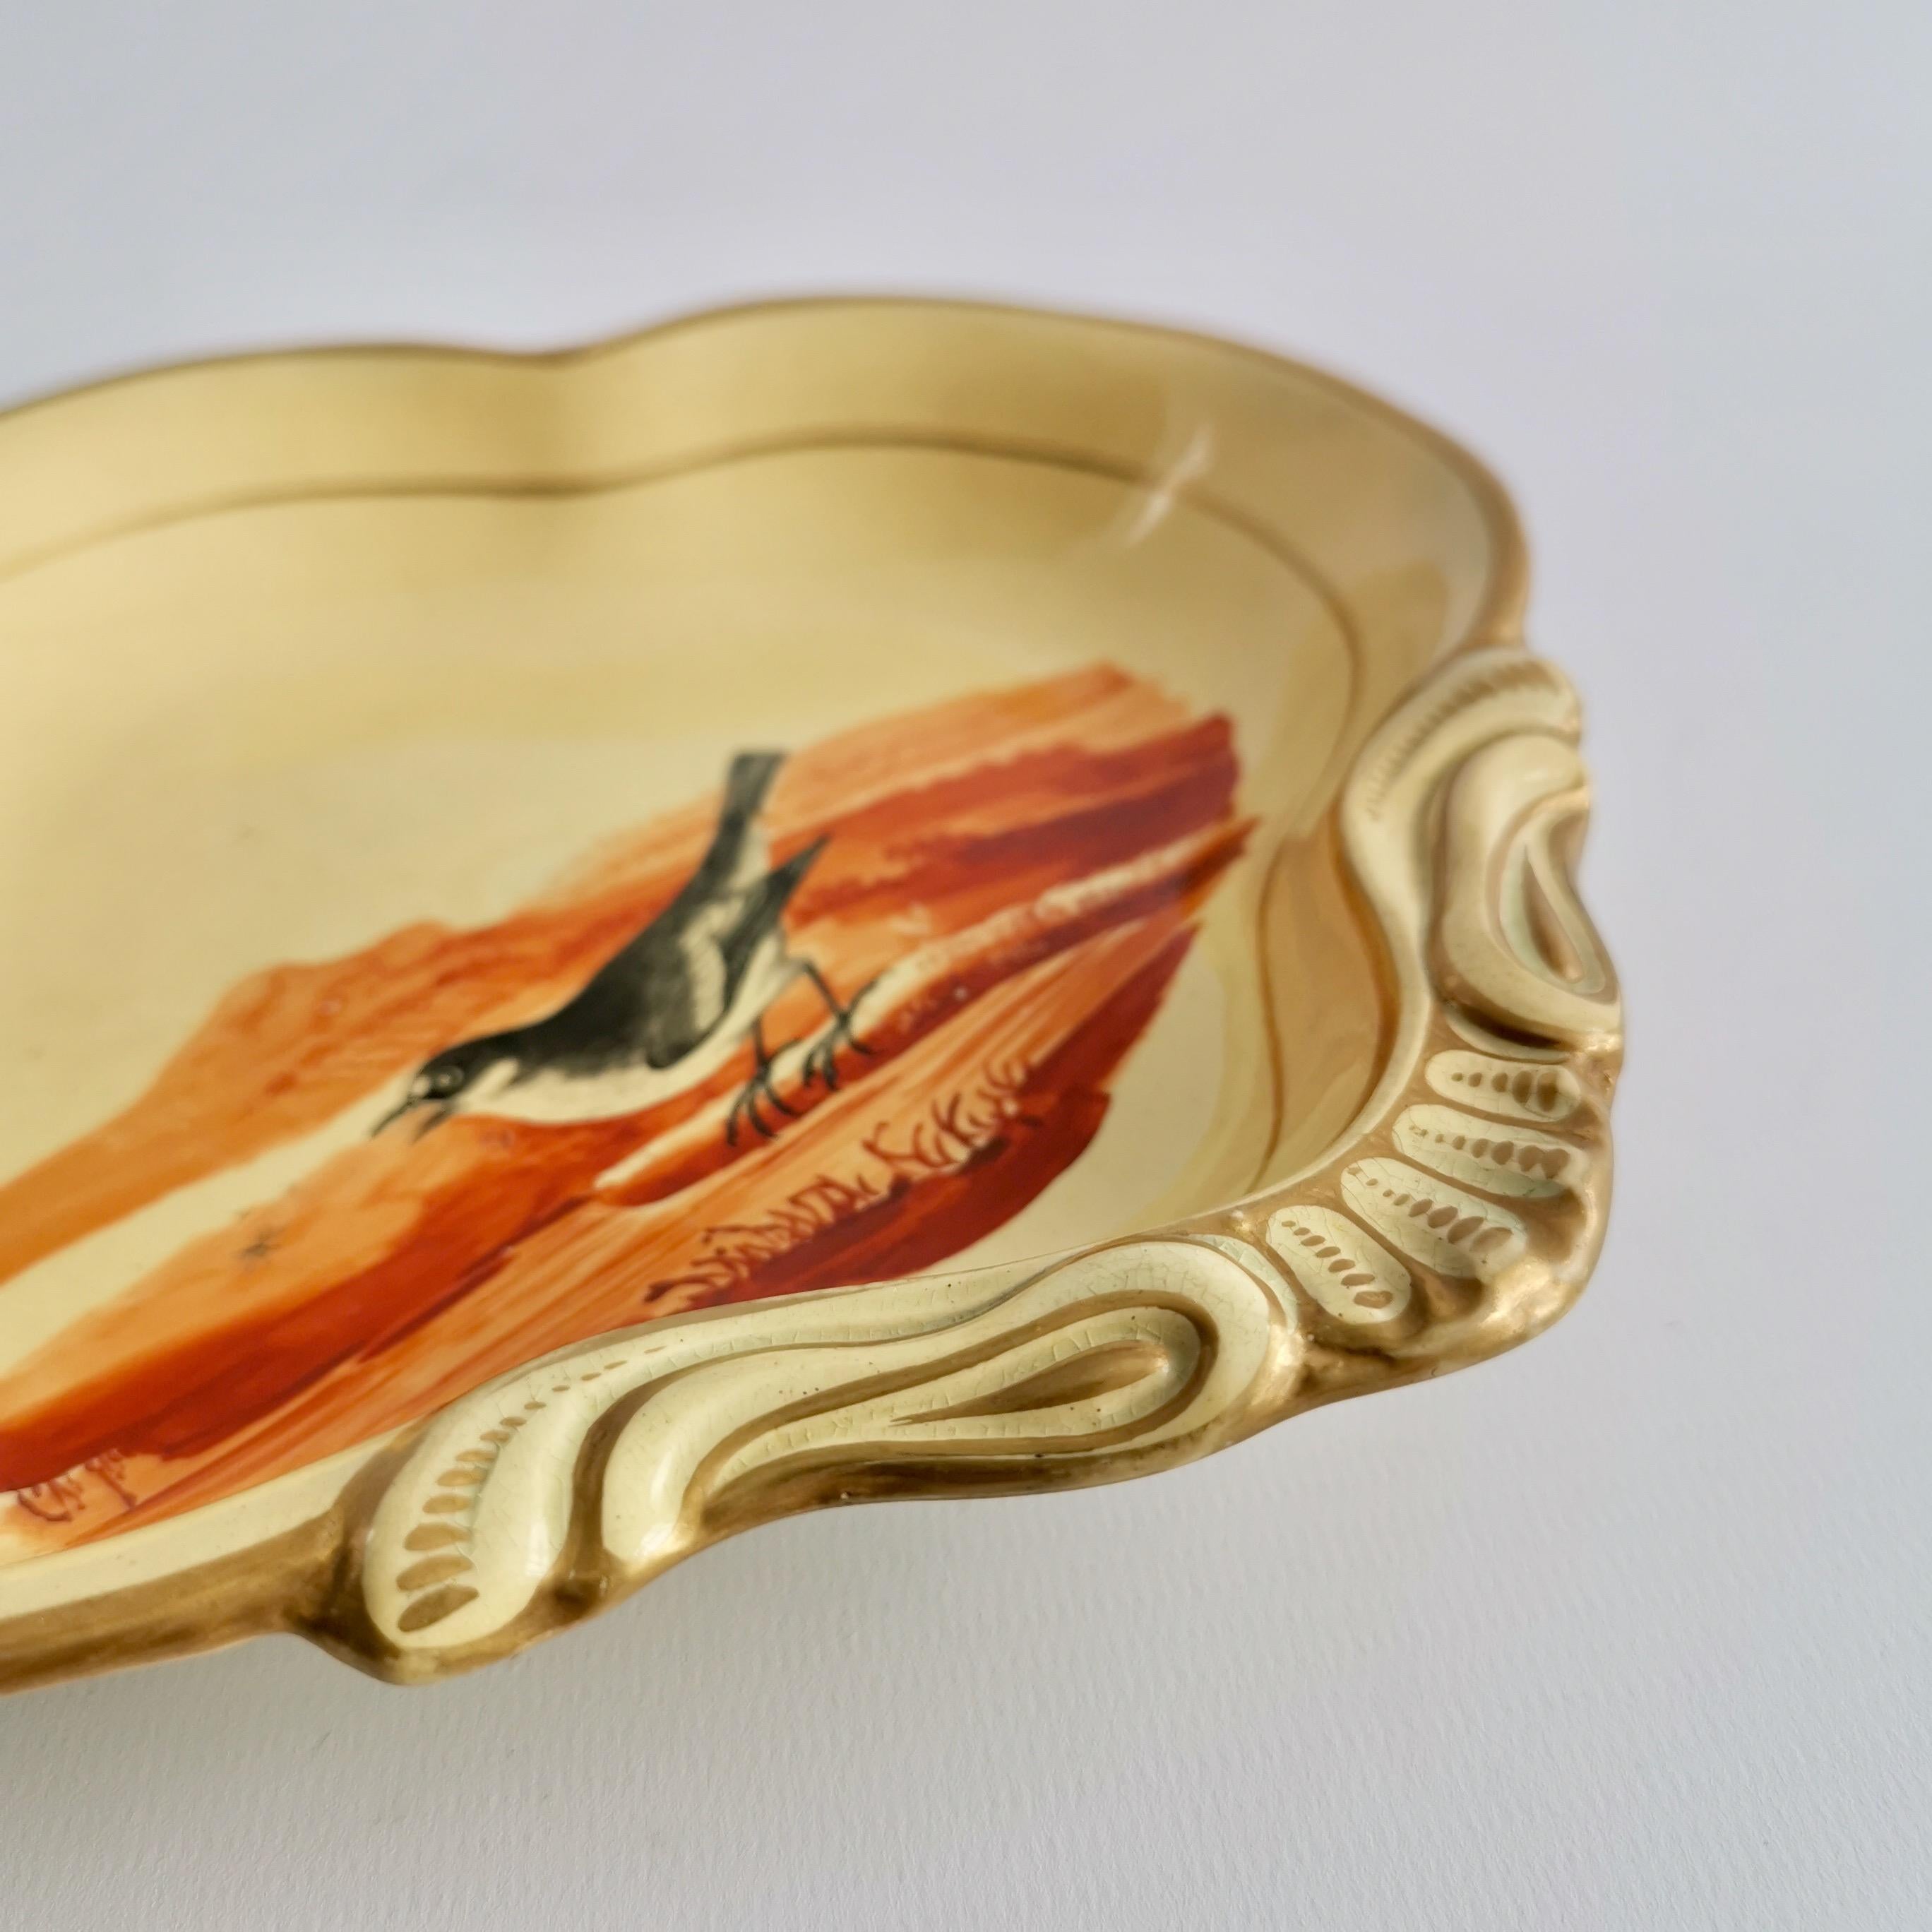 Hand-Painted Ridgway Drabware Shell Dish with Bird After Bewick, Beige, Ochre, Regency 1808